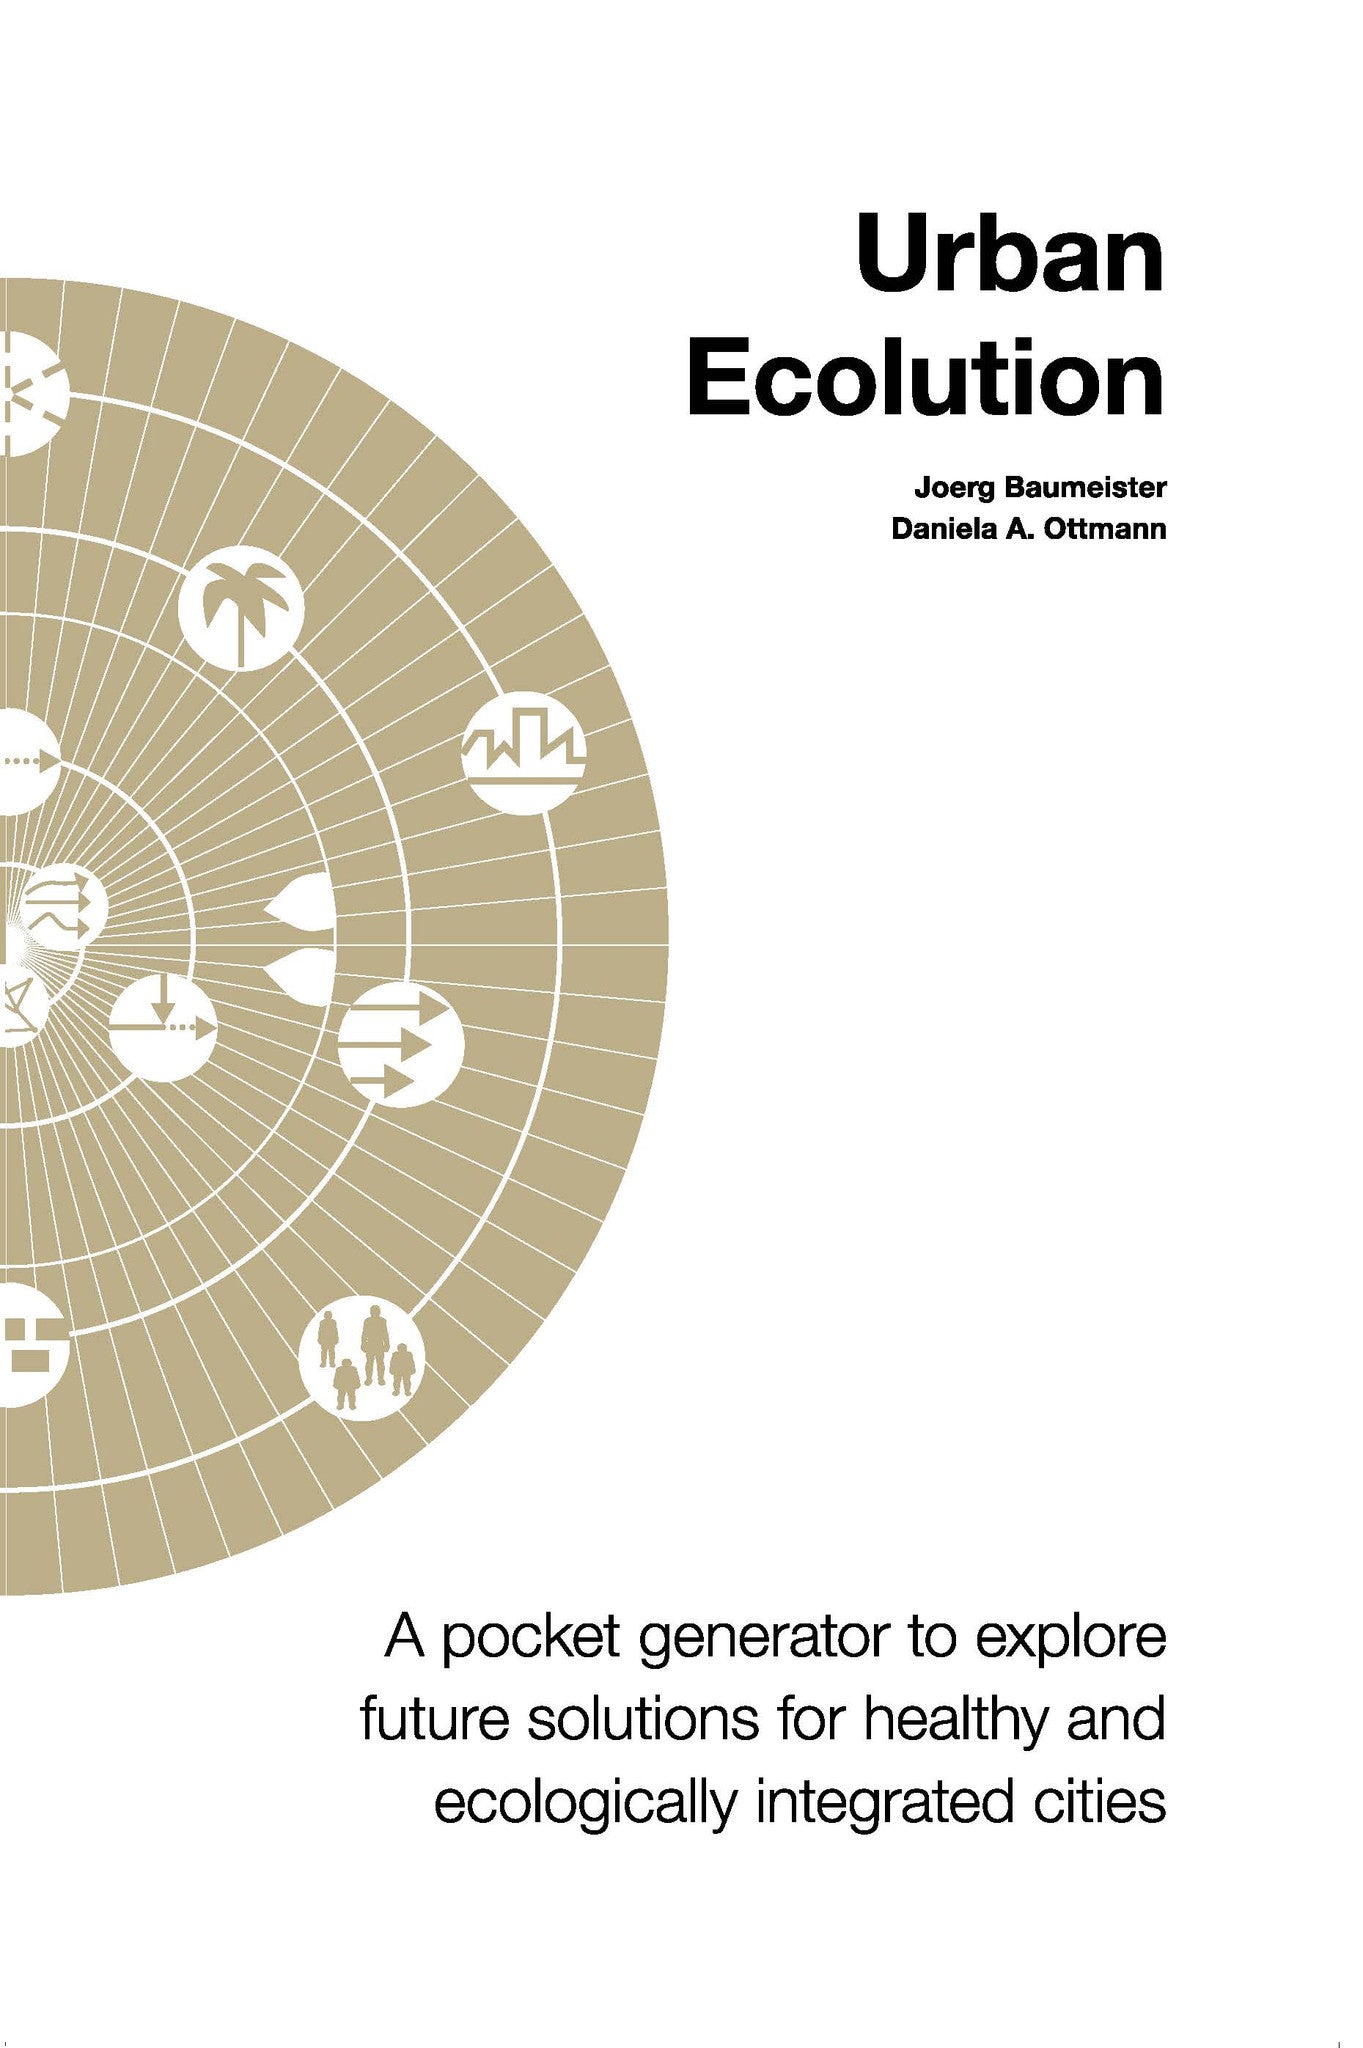 Urban Ecolution: A pocket generator to explore future solutions for healthy and ecologically integrated cities